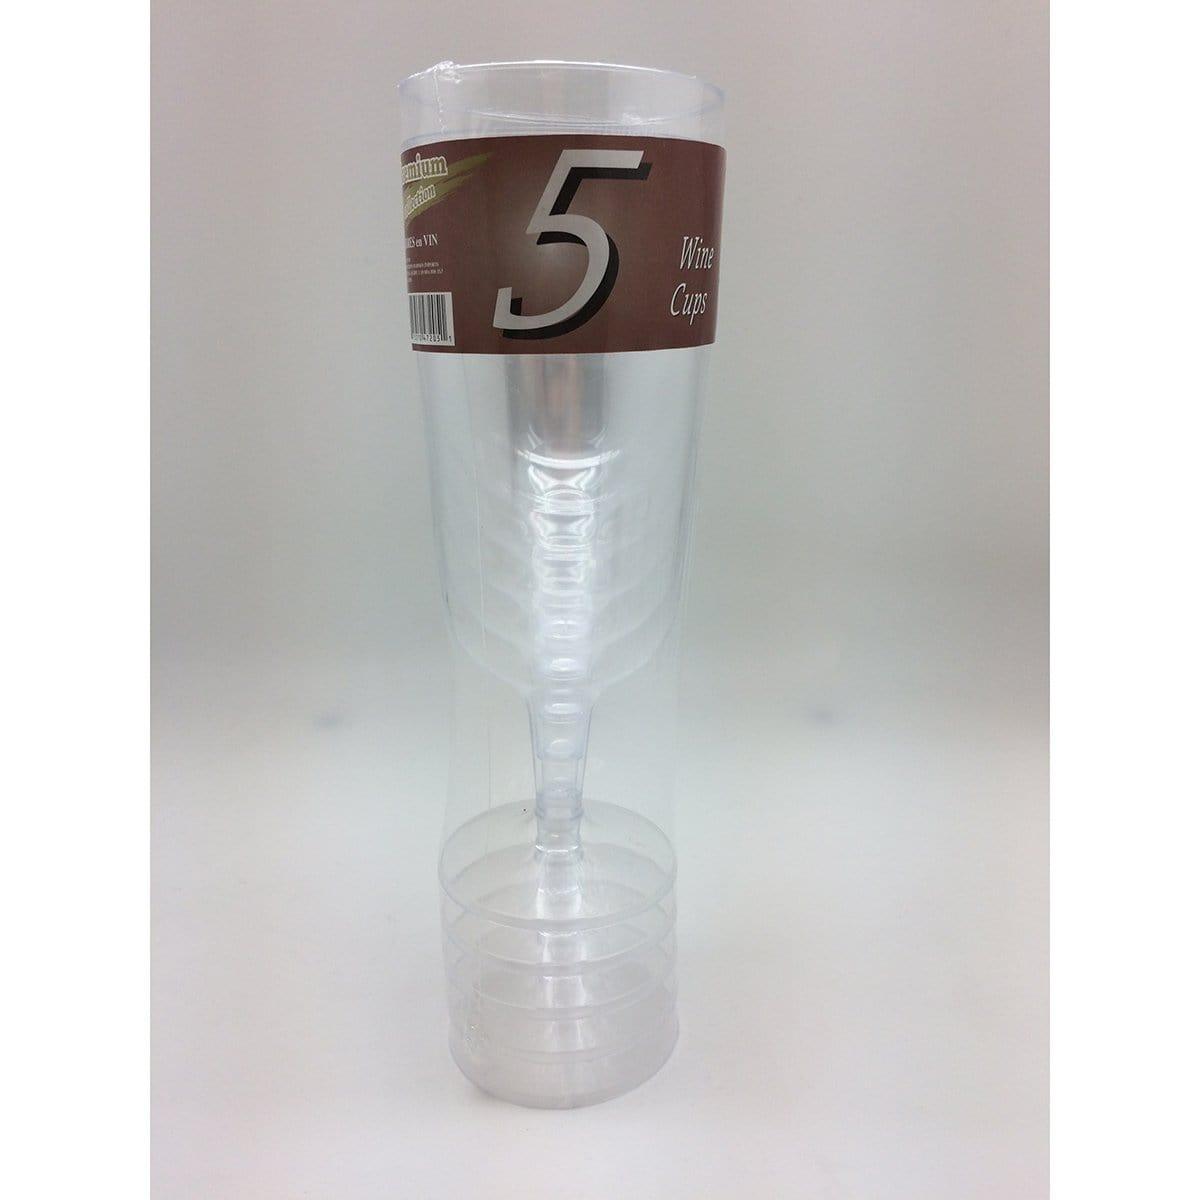 Buy Plasticware Wine Glasses 5/pkg sold at Party Expert